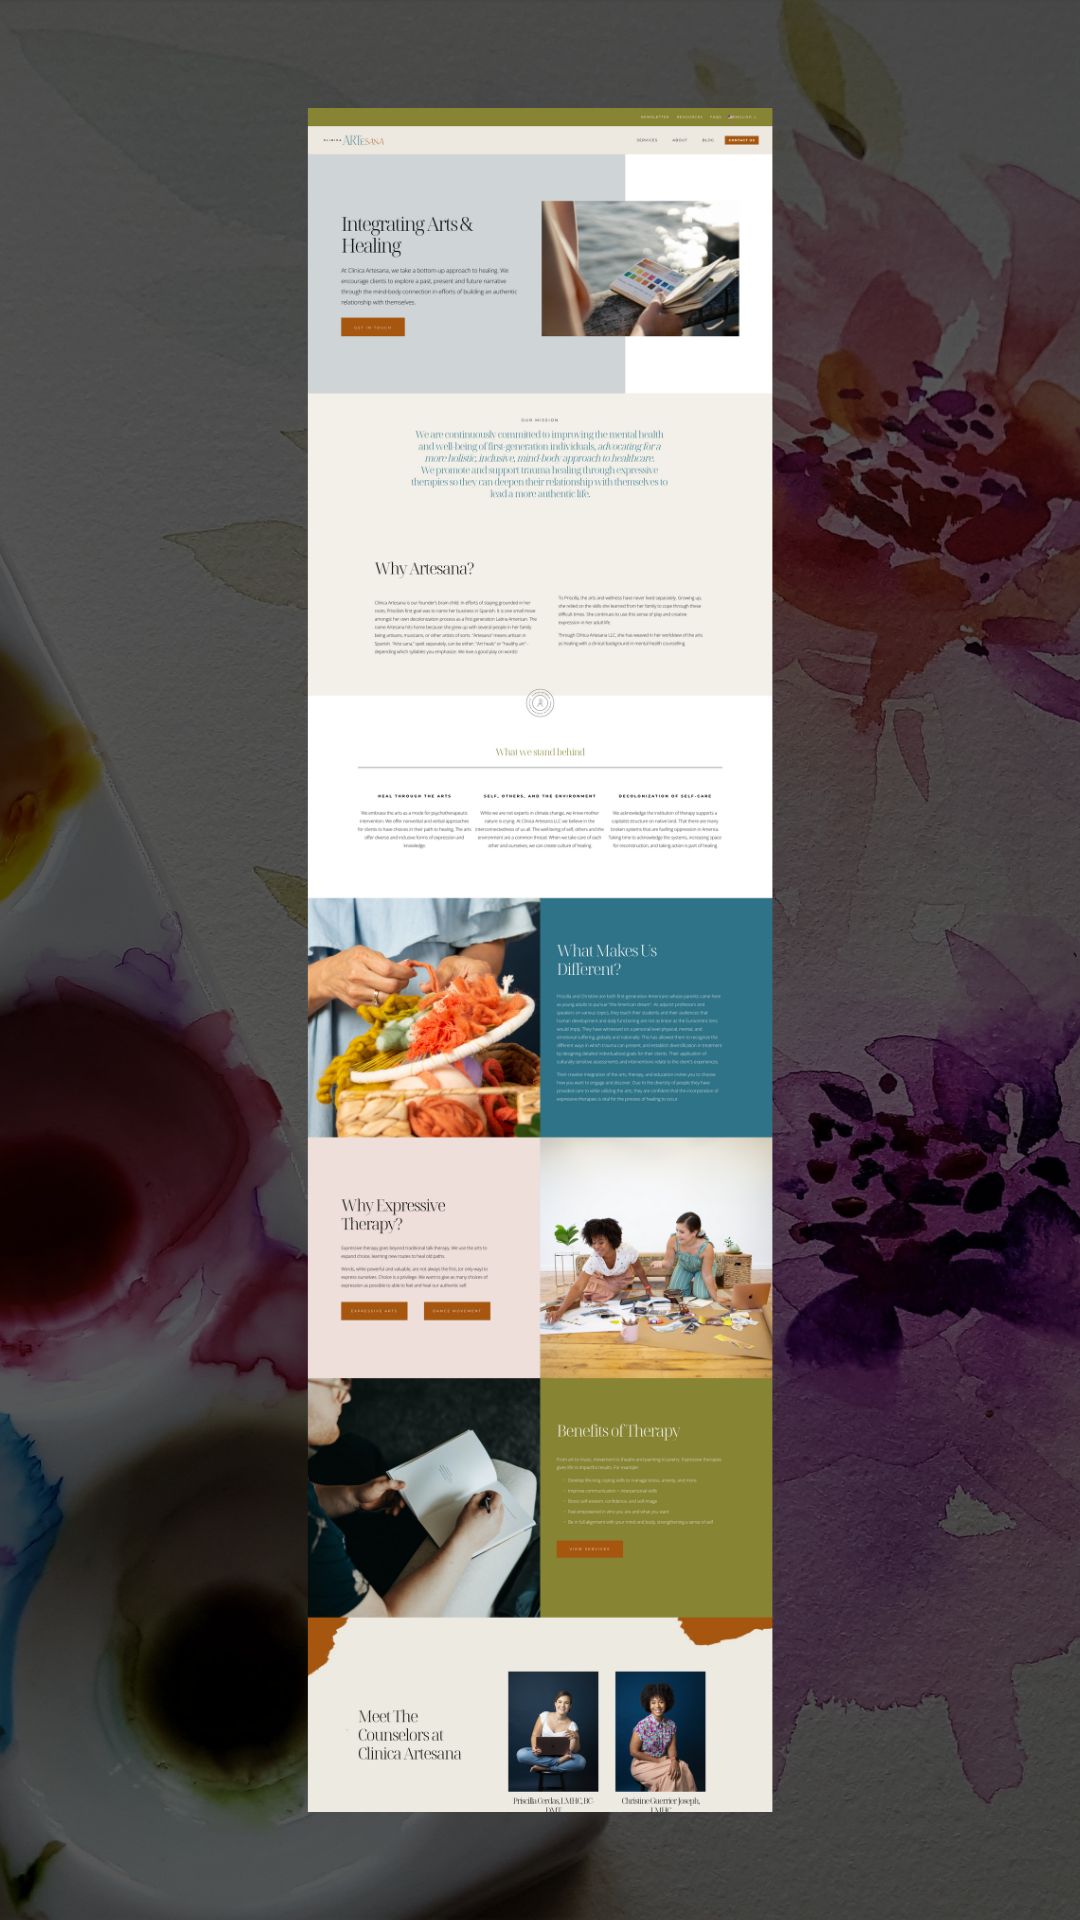 Squarespace website design mockup for Clinica Artesana, an expressive therapy clinic in Florida